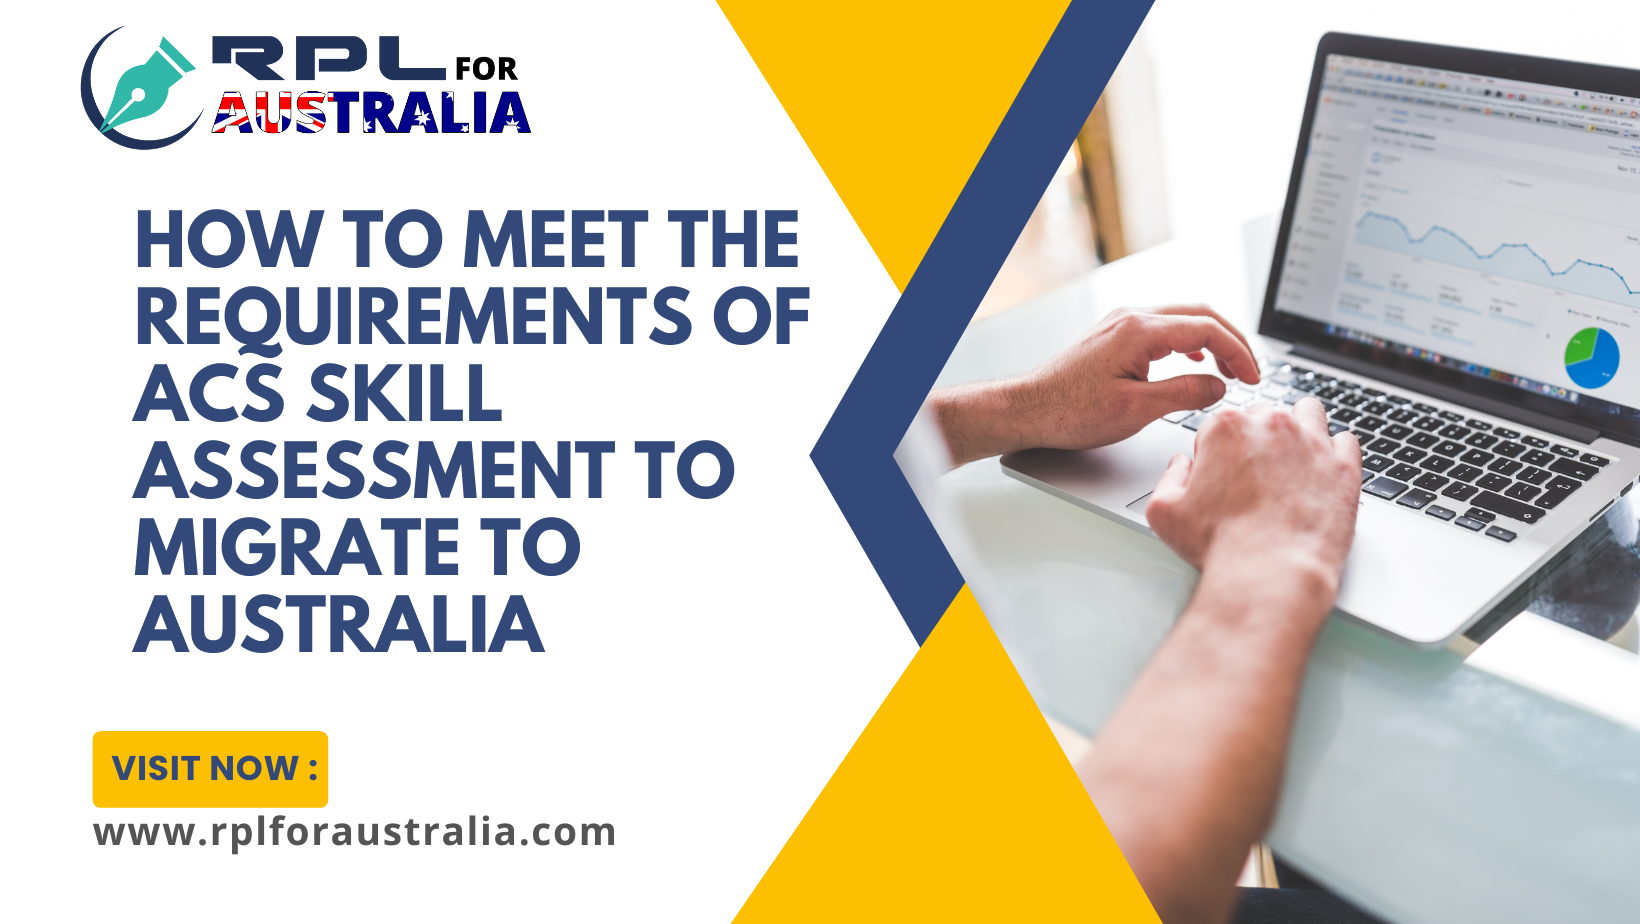 How To Meet The Requirements of ACS Skill Assessment To Migrate To Australia